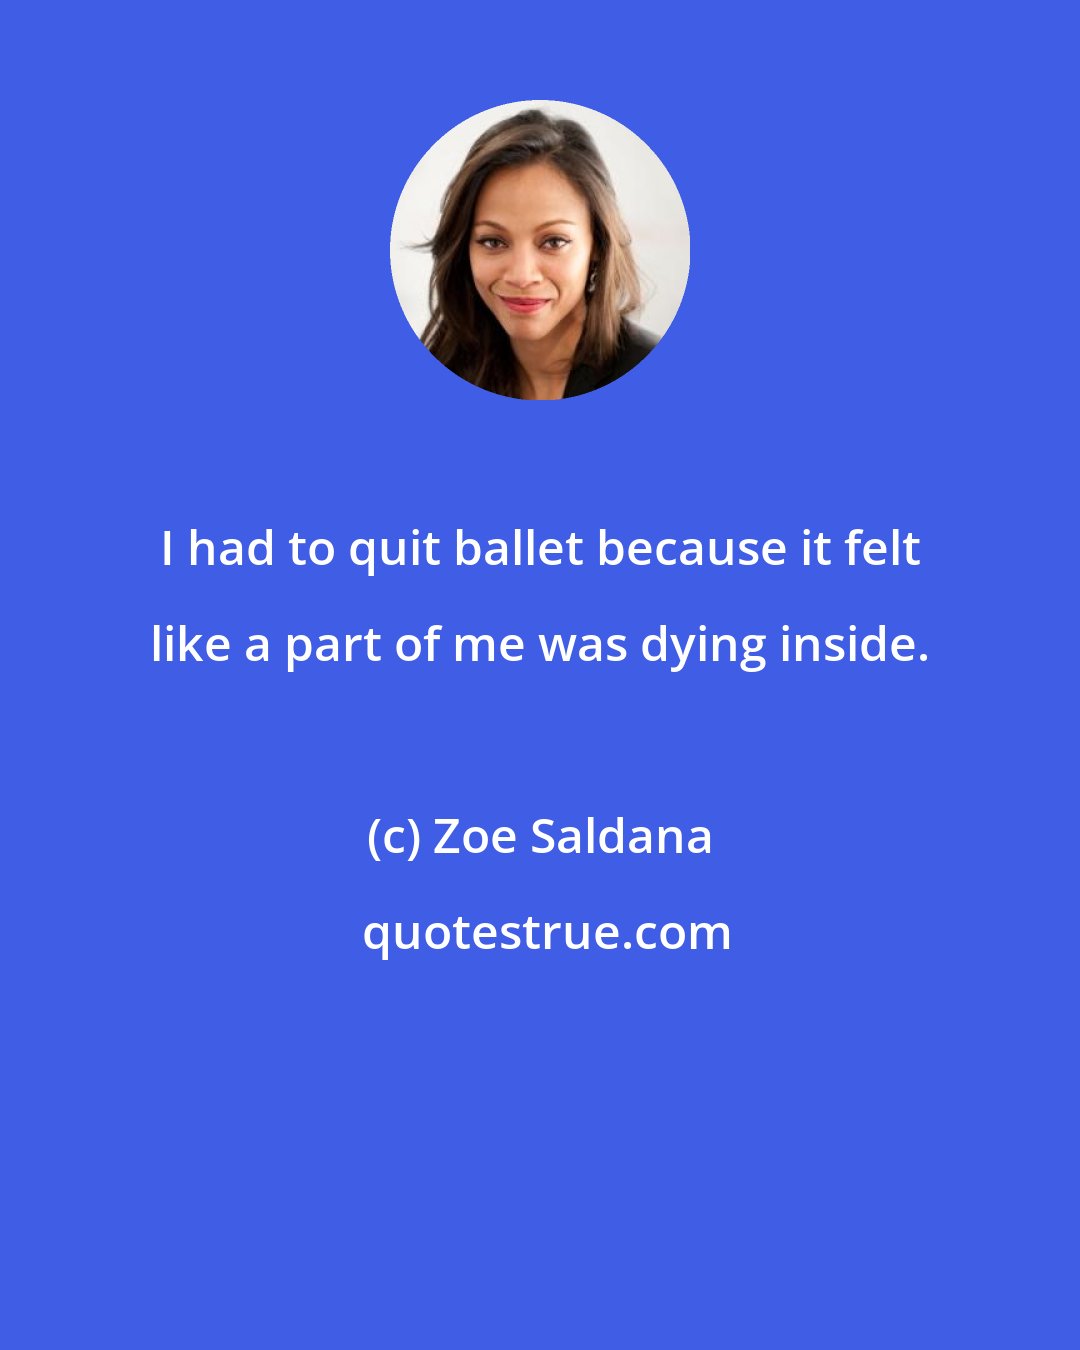 Zoe Saldana: I had to quit ballet because it felt like a part of me was dying inside.